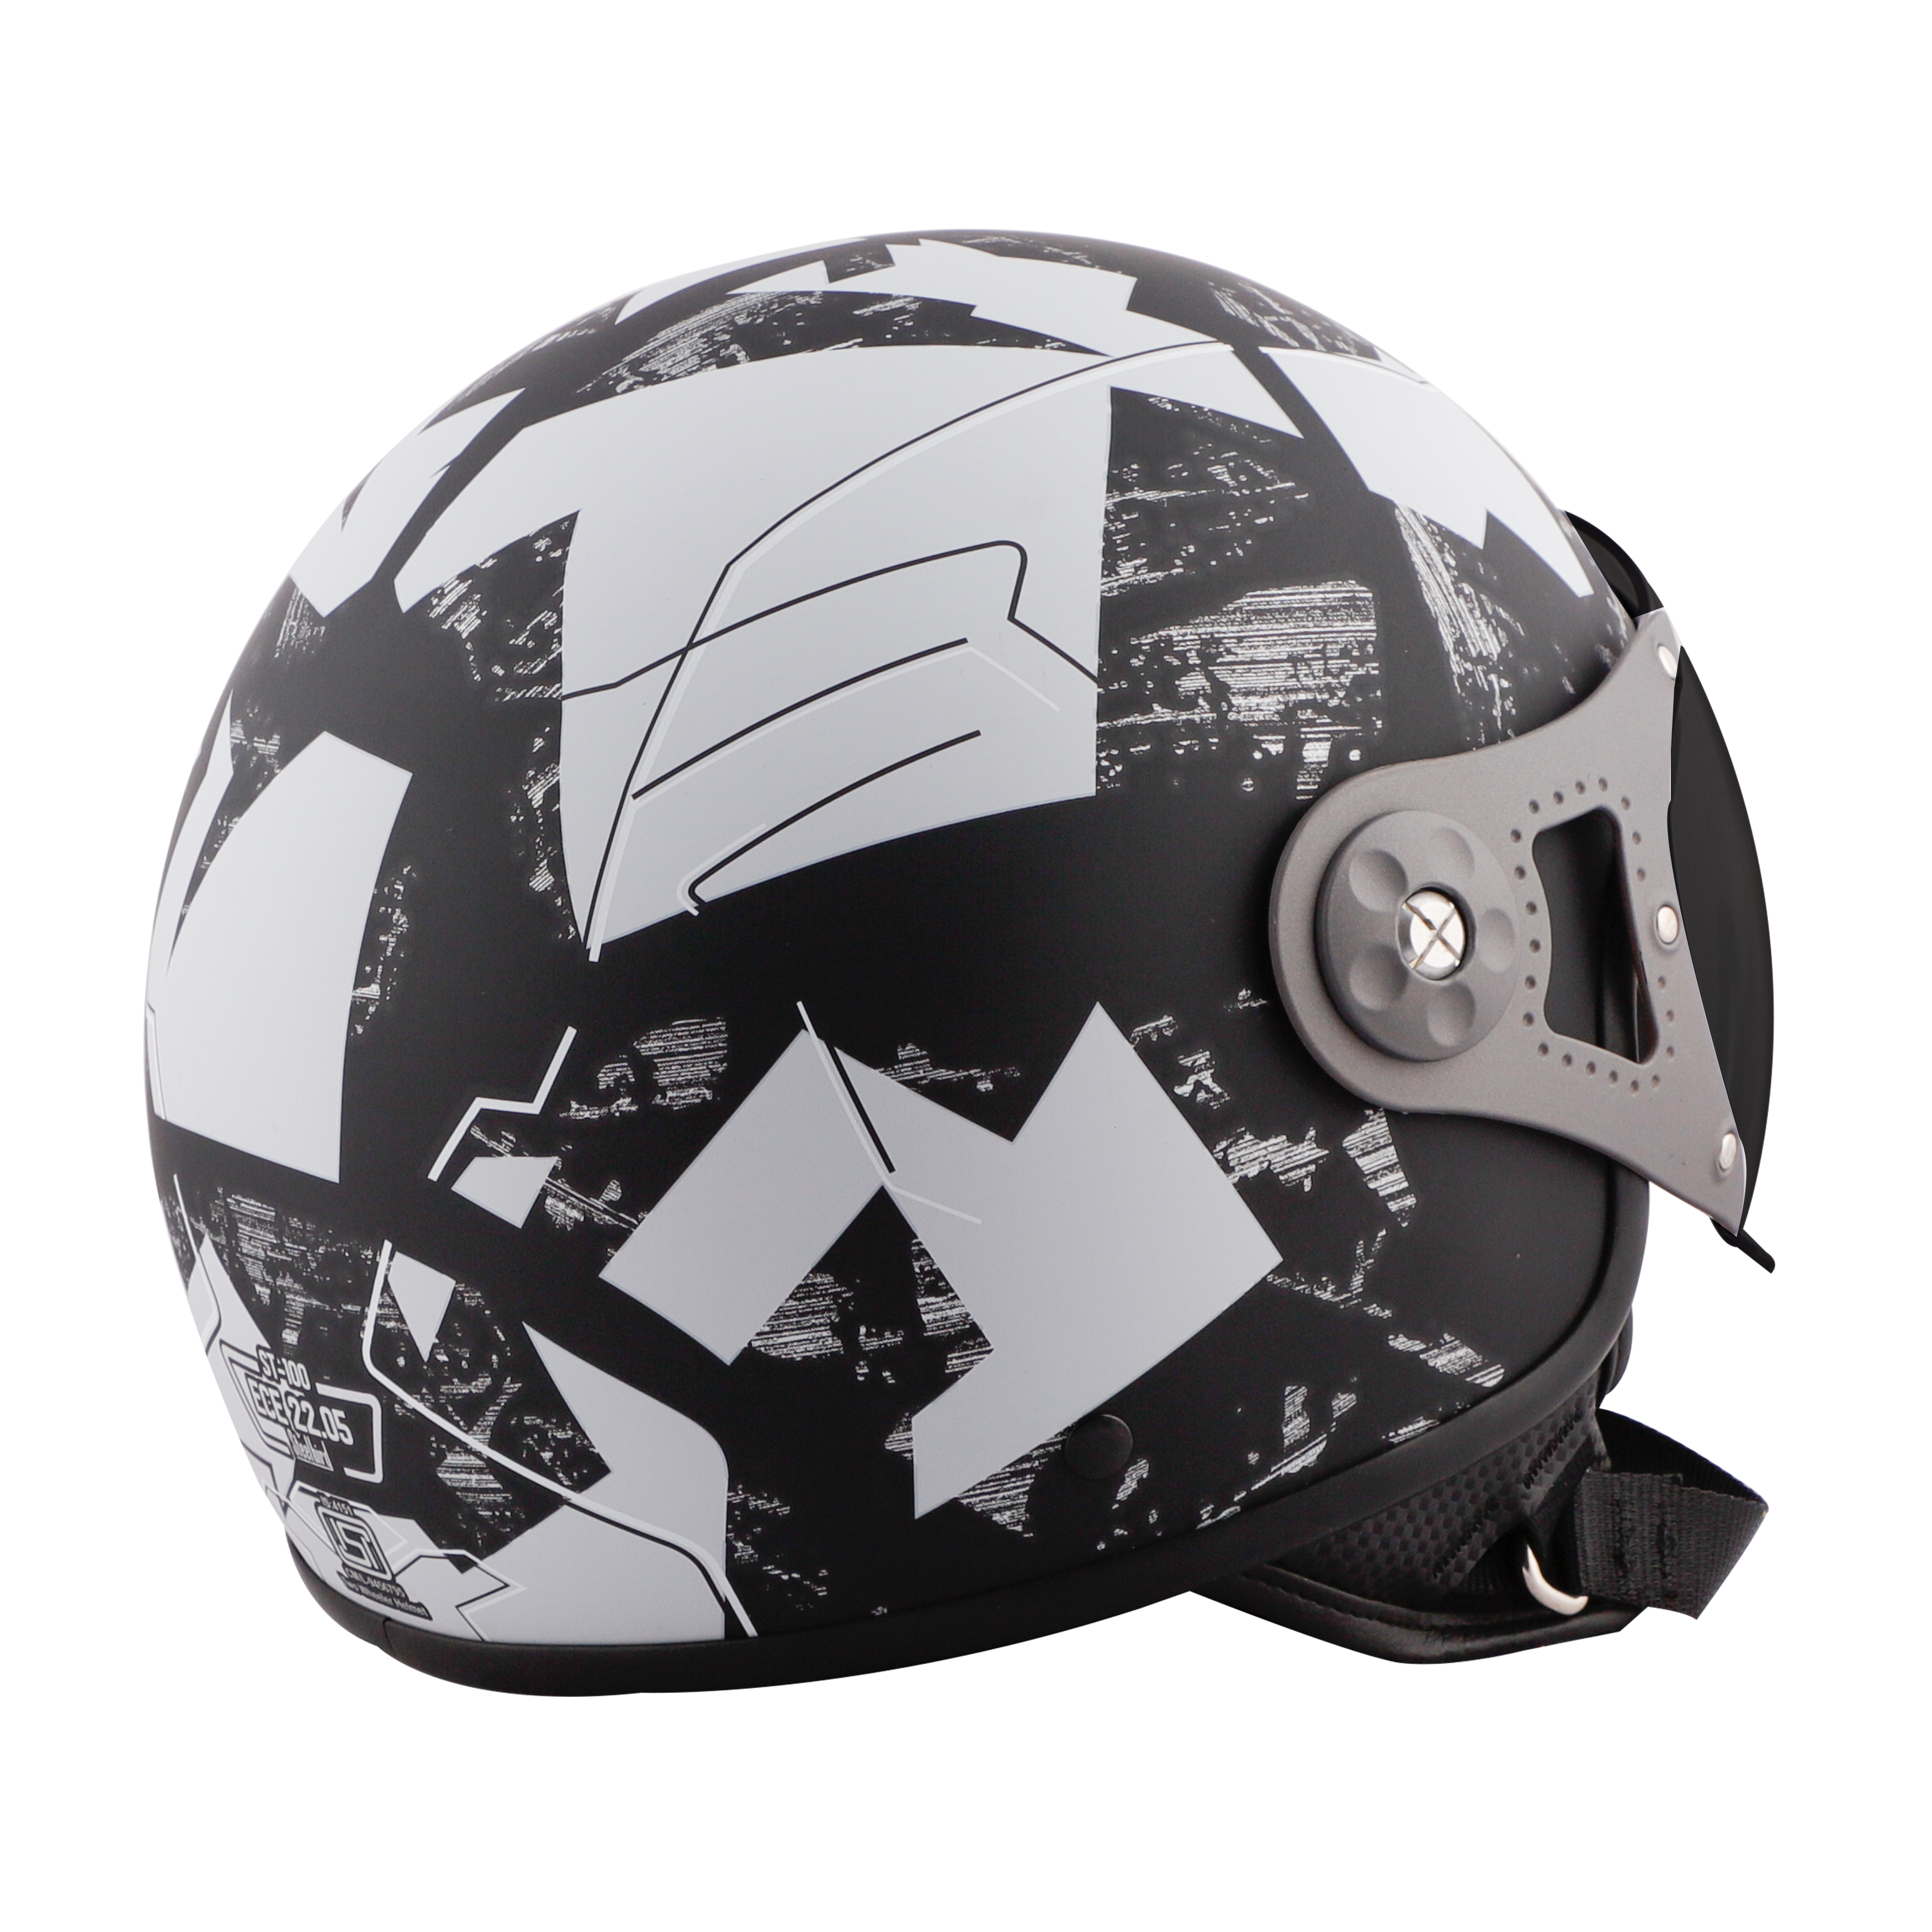 ST-100 CAMO ECE GLOSSY BLACK WITH SILVER (FITTED WITH CLEAR VISOR. SMOKE VISOR ONLY FOR ILLUSTRATION PURPOSE)